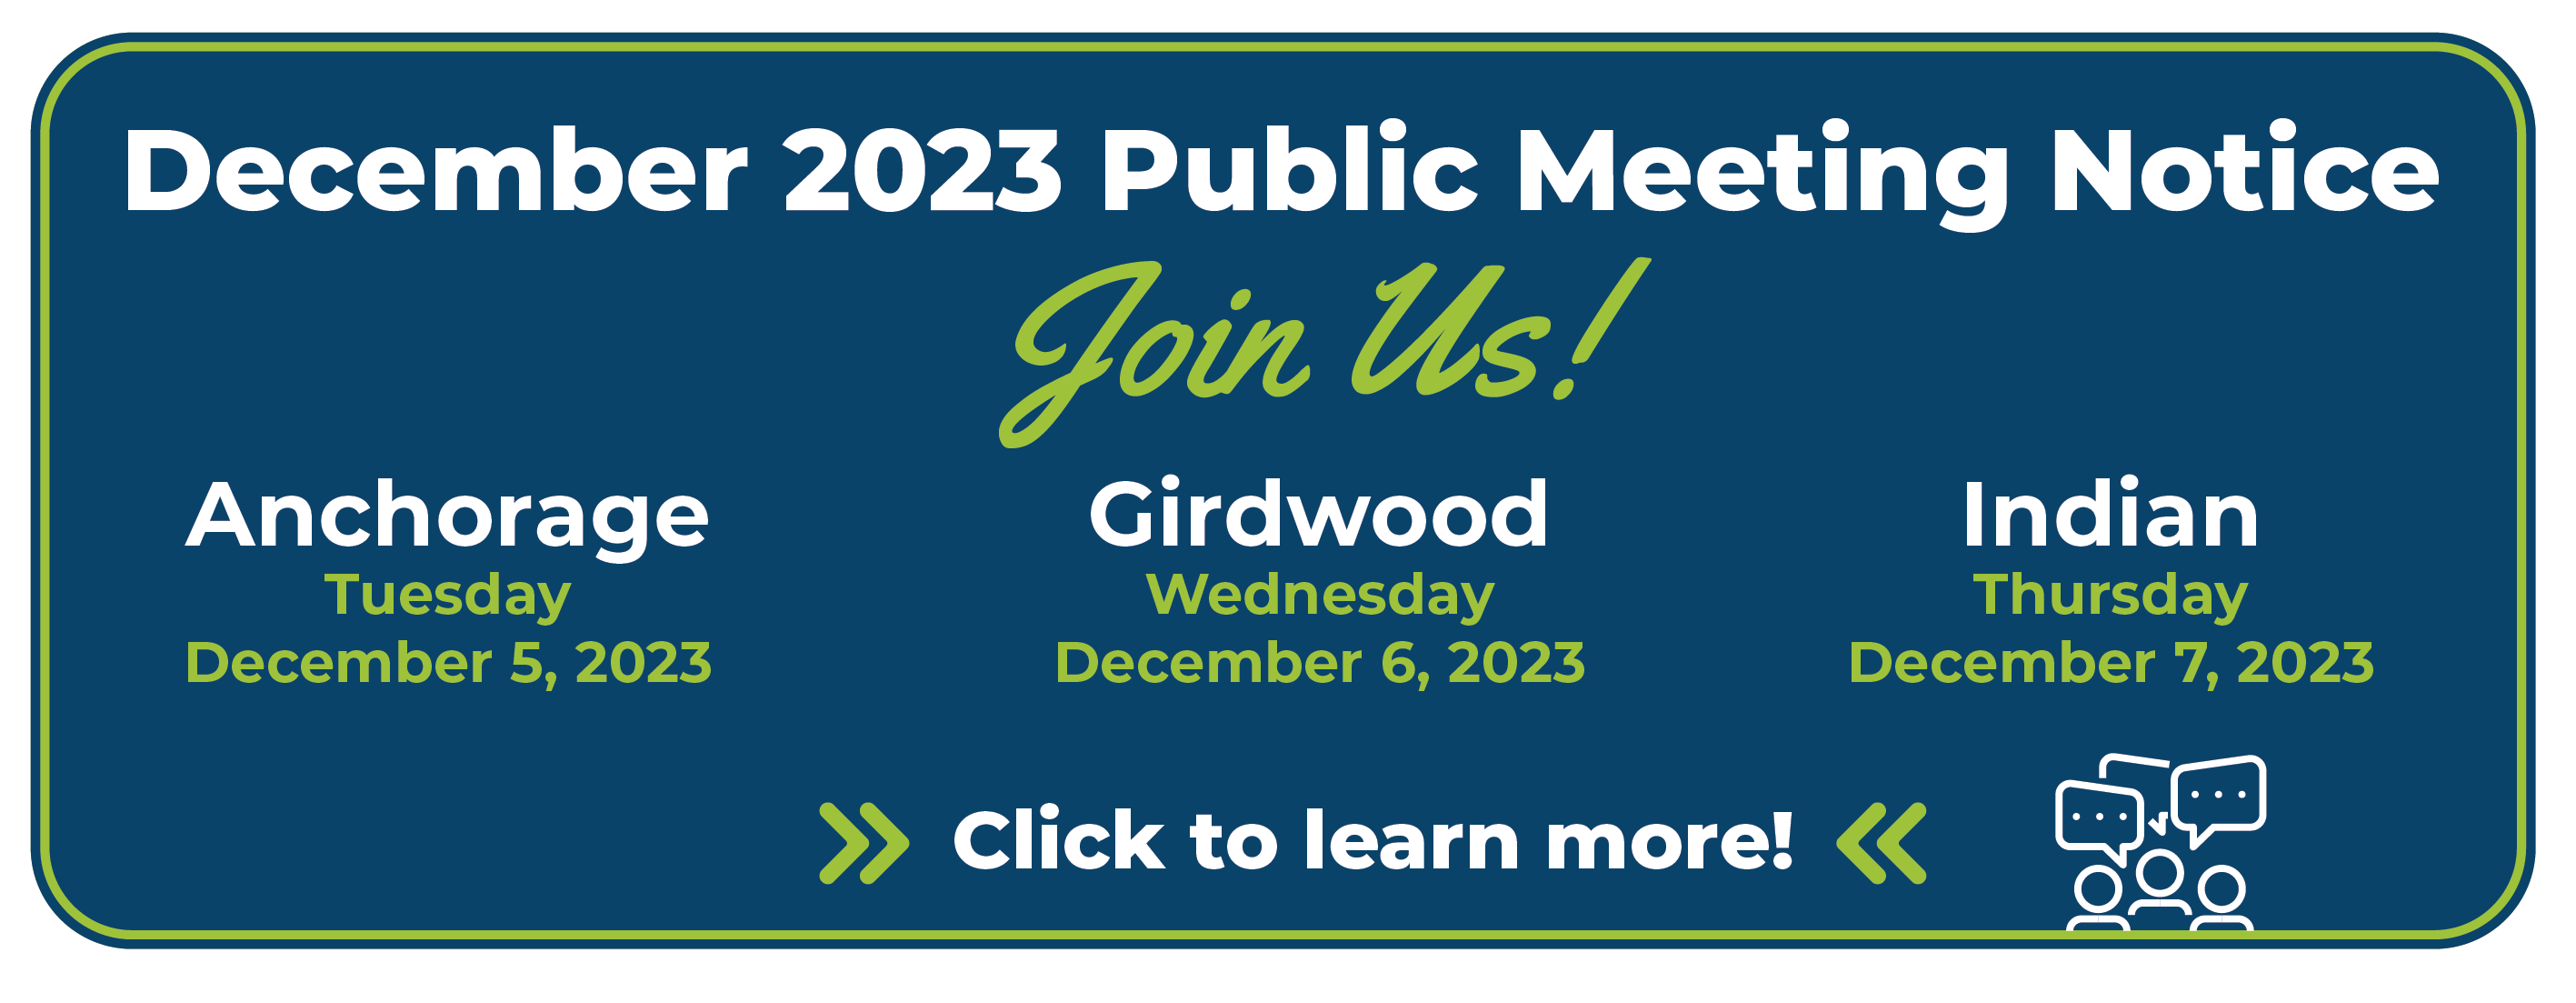 December 2023 Public Meeting Banner redirect to public meeting details page